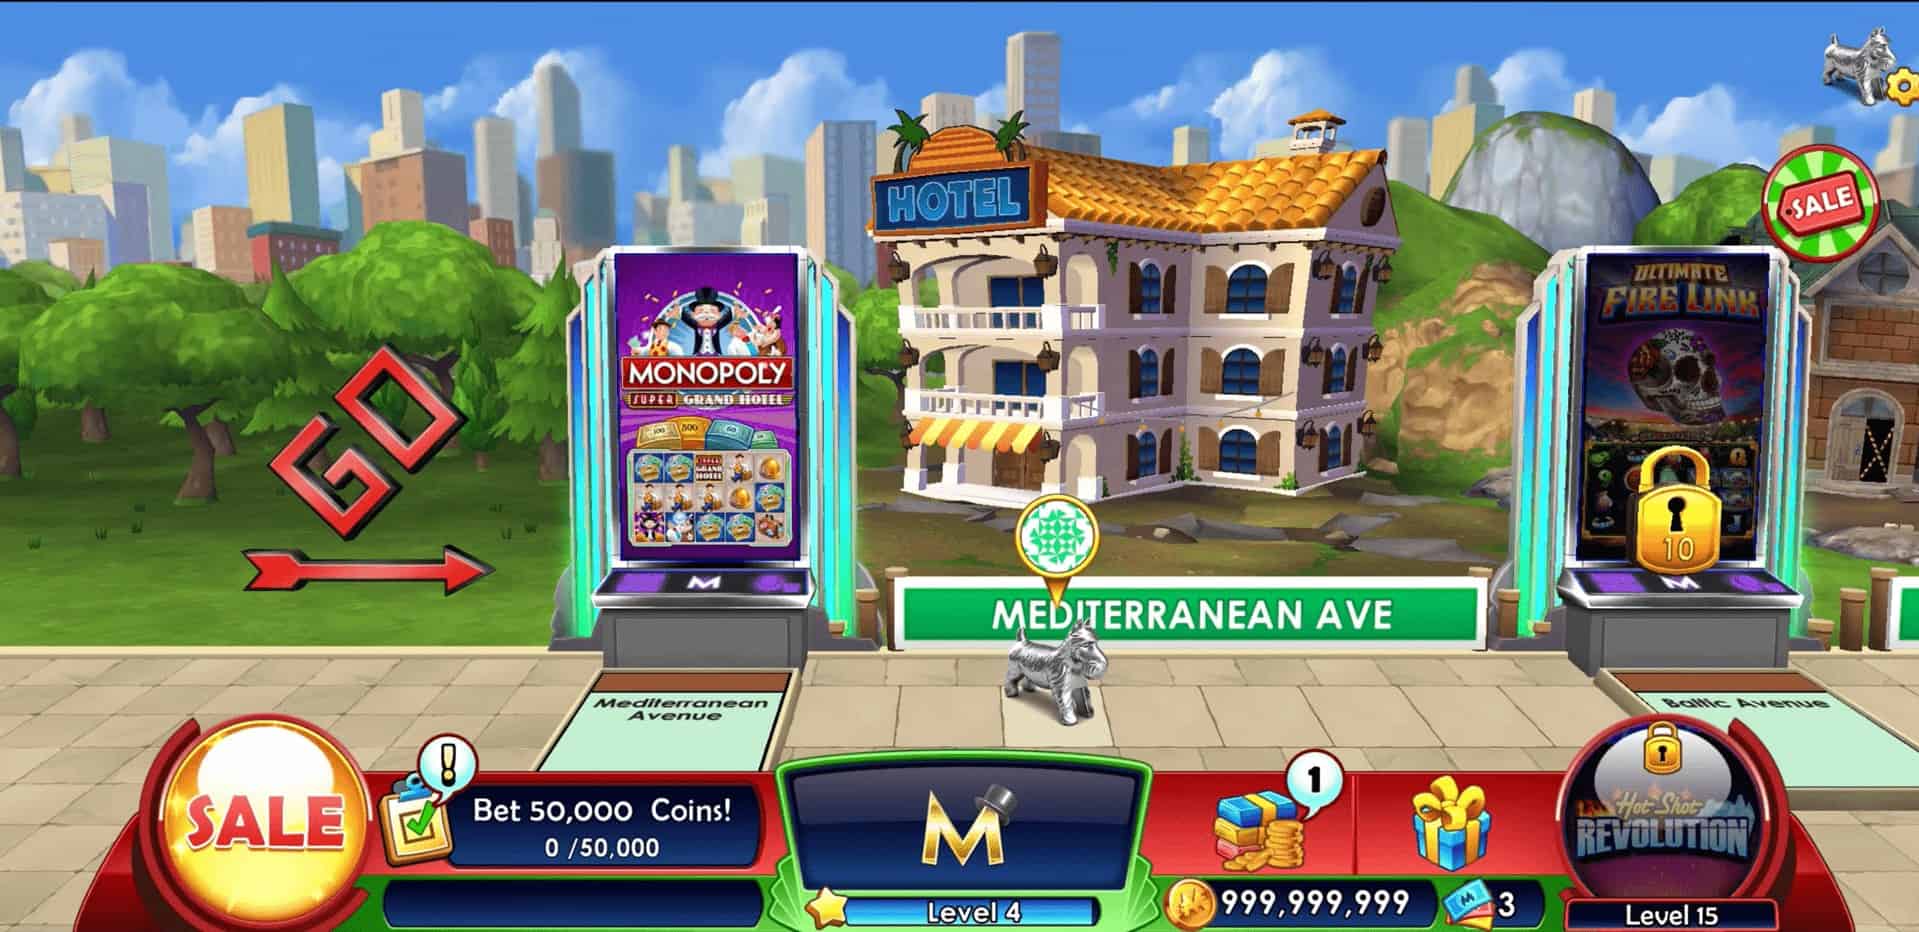 MONOPOLY Slots free coins proof